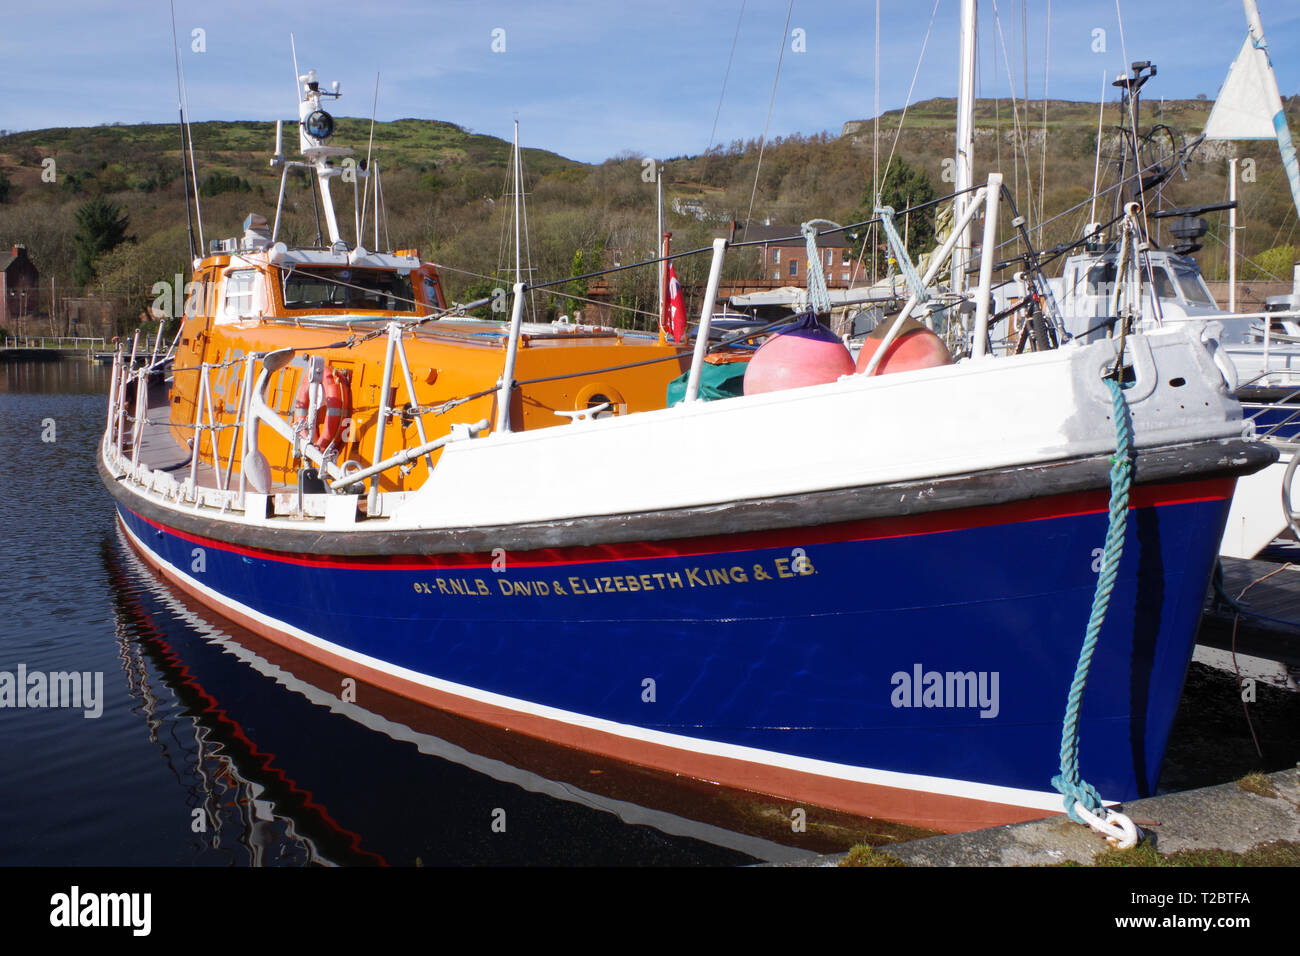 Solent class “David and Elizabeth King & EB” formerly the Longhope, Orkney lifeboat, docked at Bowling Harbour Scotland Stock Photo